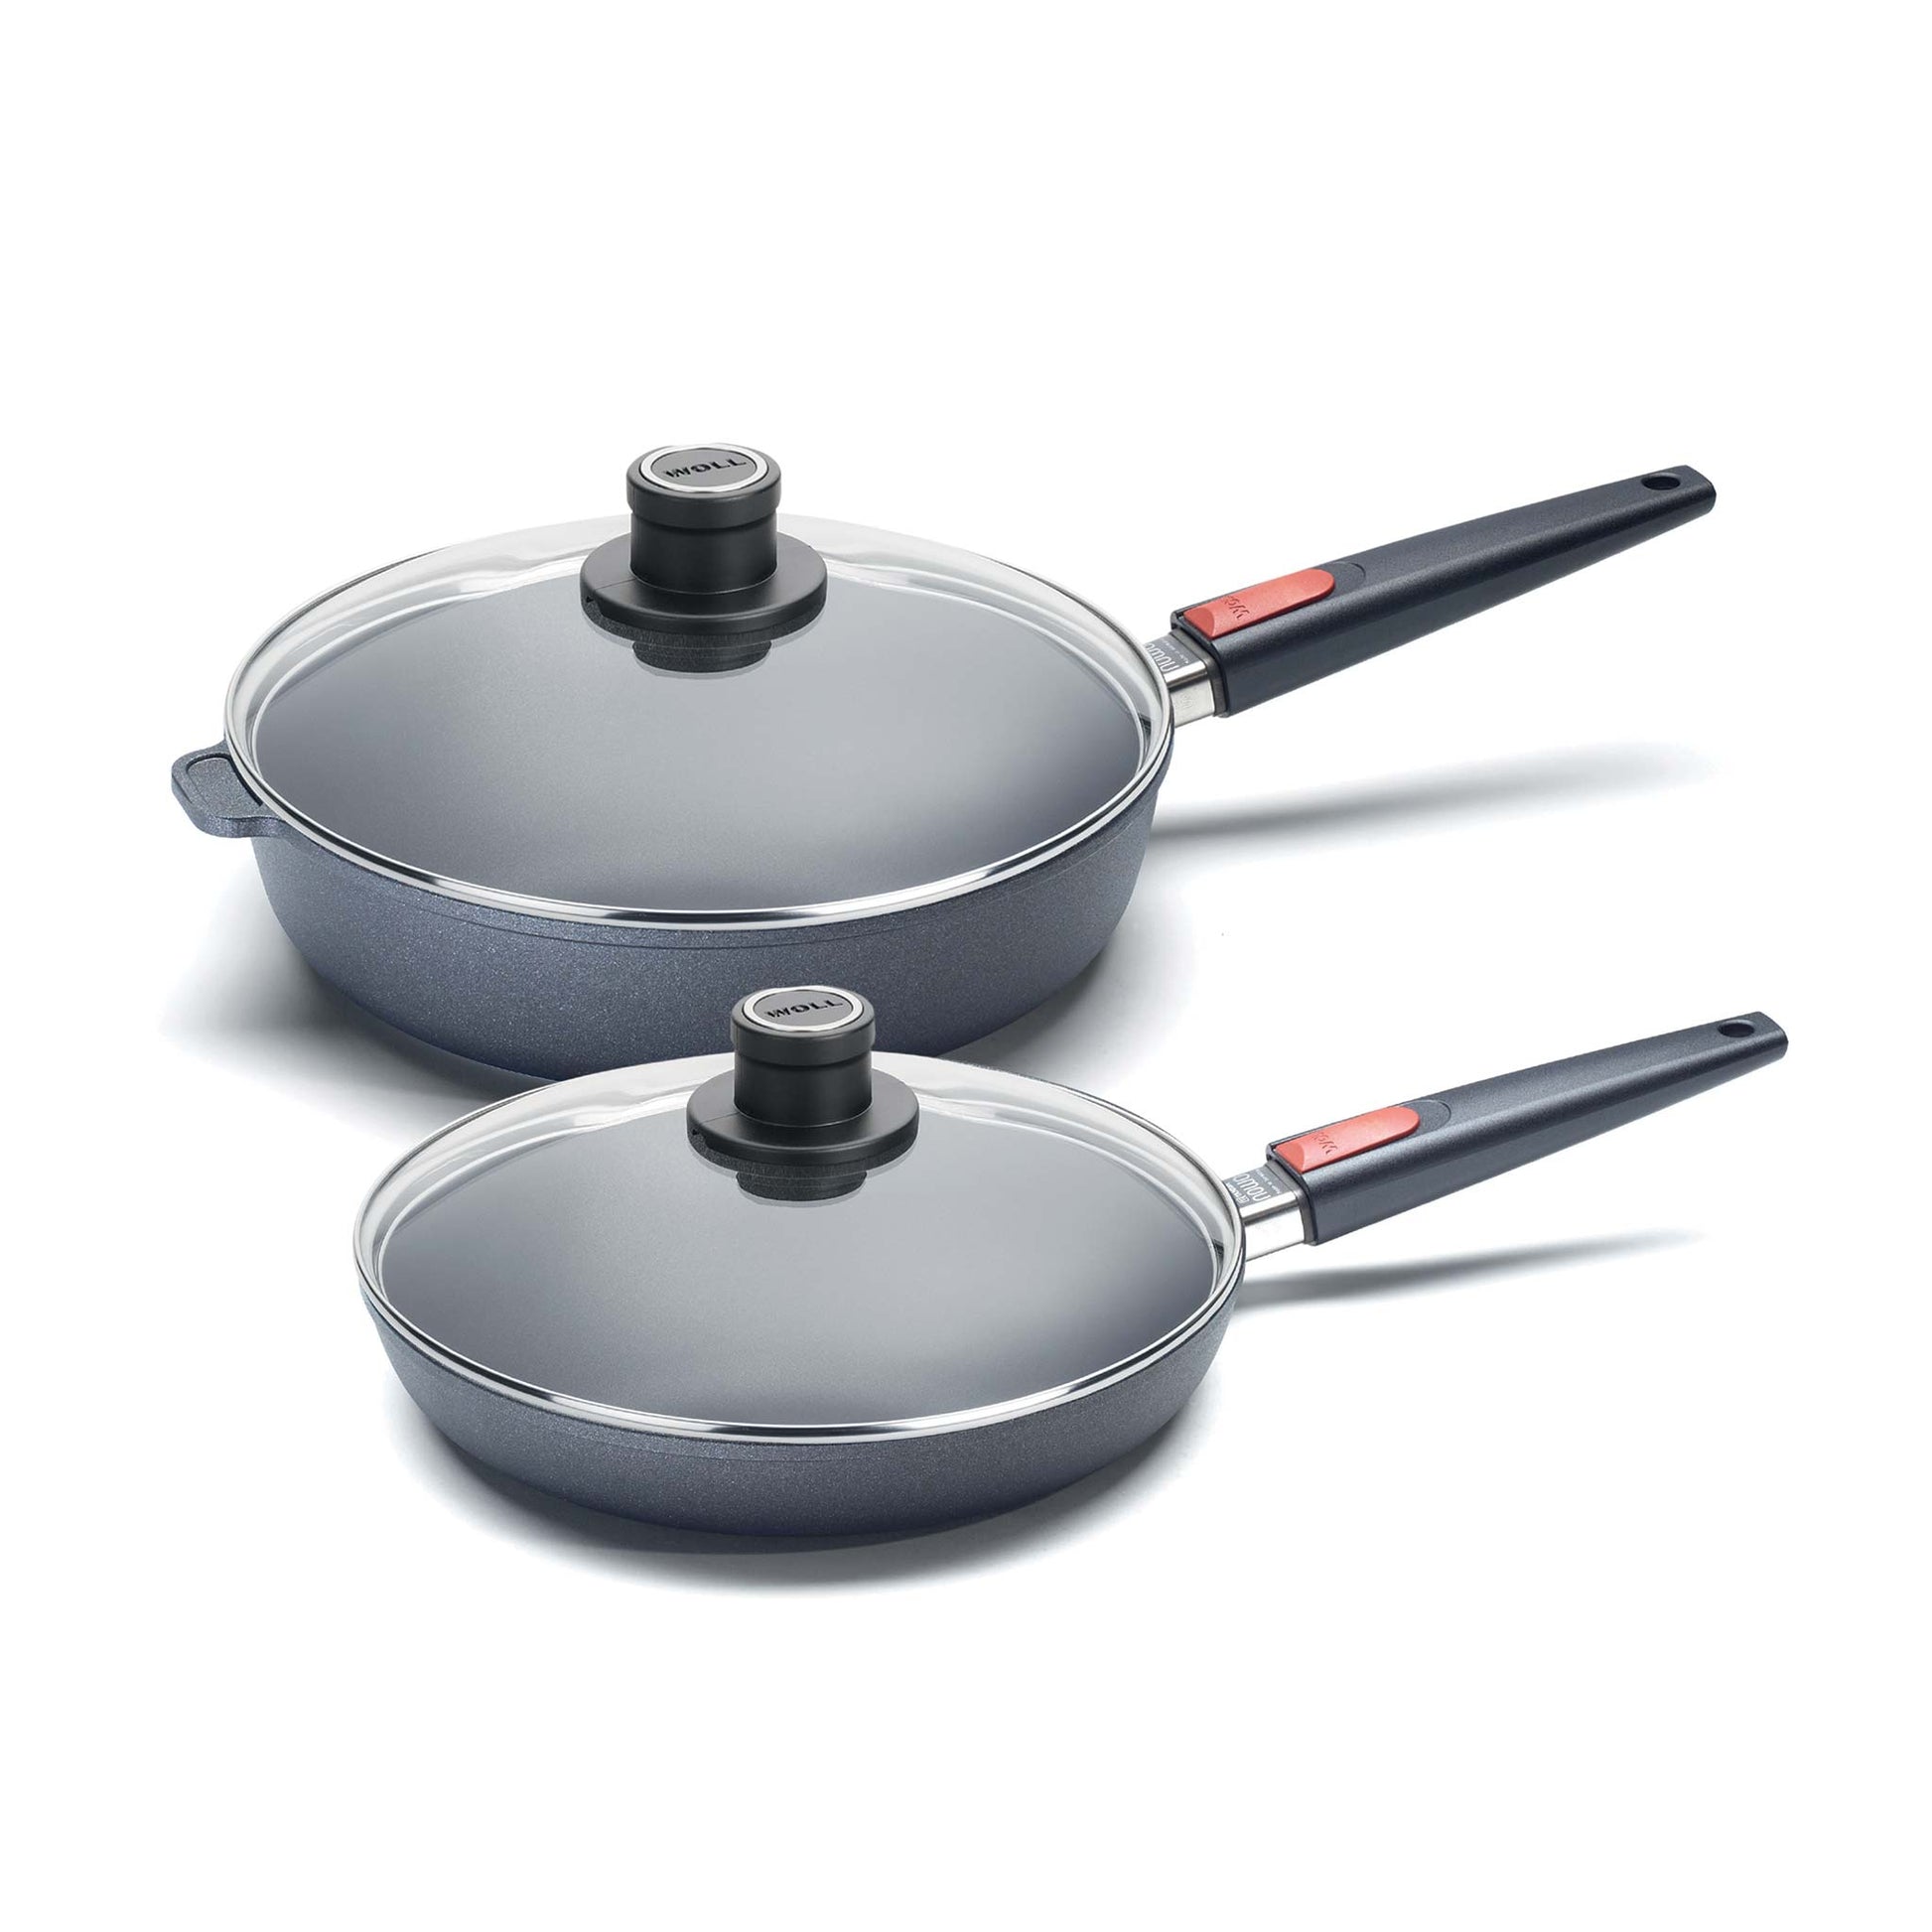 How to use your Woll Cookware pots and pans correctly?